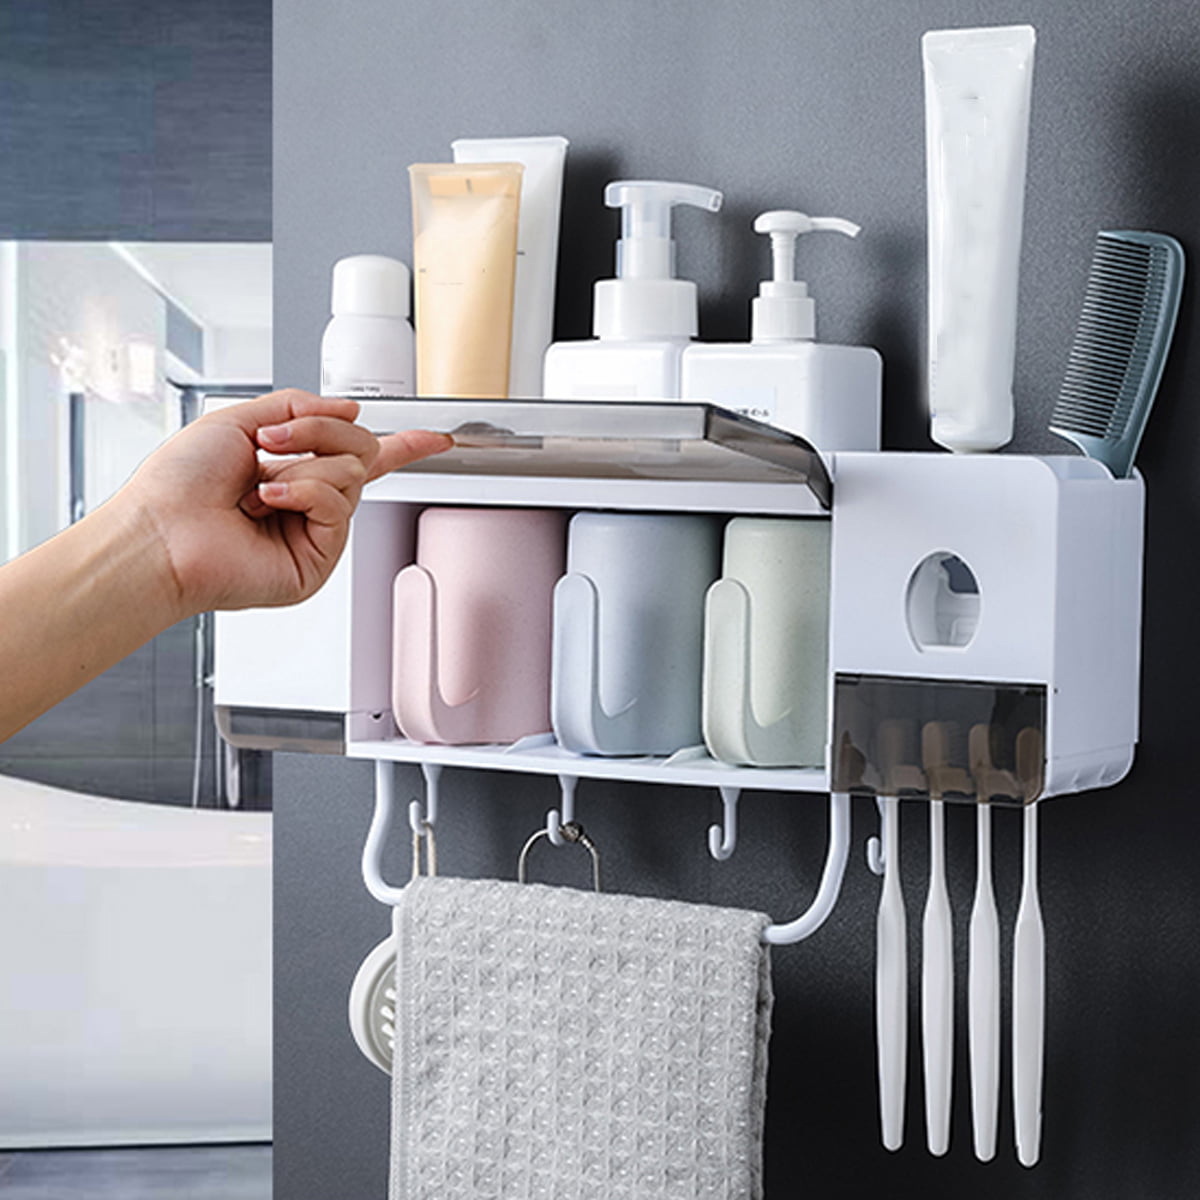 Details about   Automatic Toothpaste Dispenser Wall Mount Dustproof Toothbrush Holder Storage 